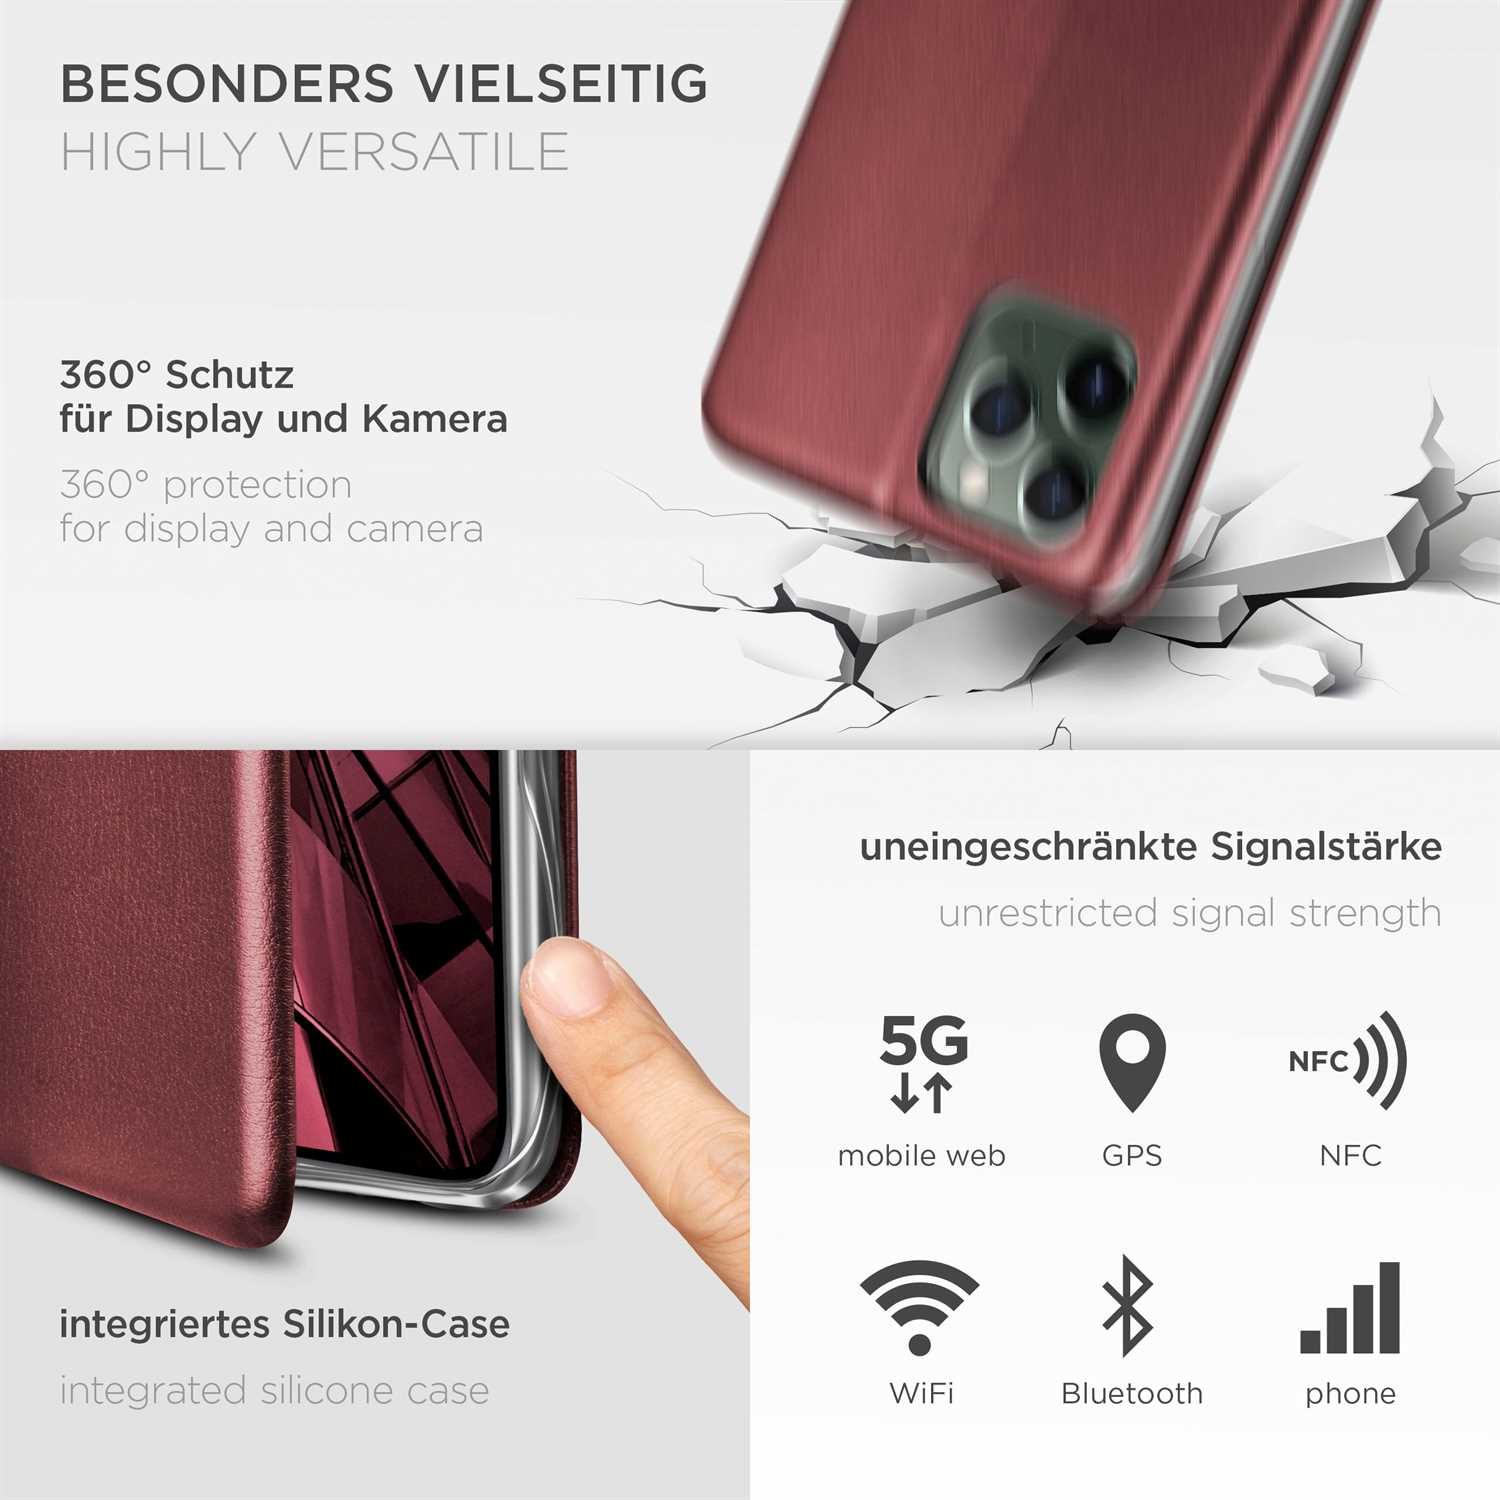 Business Flip Cover, ONEFLOW Pro 11 Red Case, Burgund Max, - iPhone Apple,